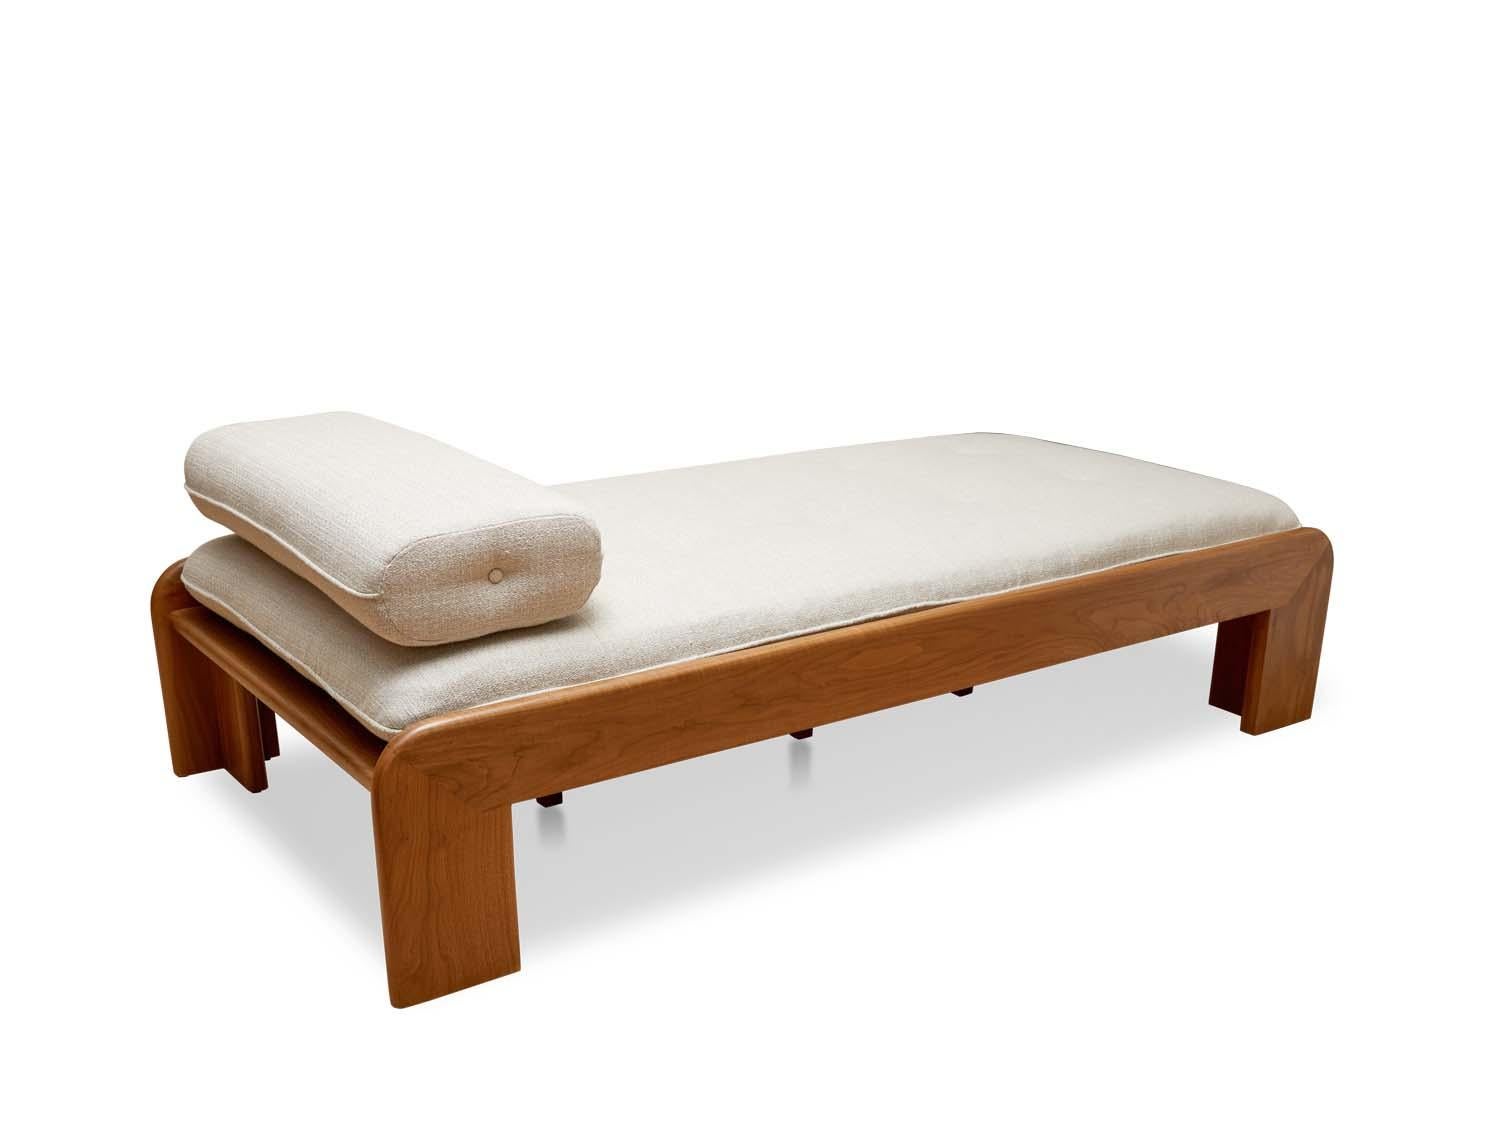 Walnut Topa Daybed by Lawson-Fenning. The Topa daybed features a roundover frame handcrafted in walnut or oak. The daybed is tufted and comes with a loose bolster pillow. 

The Lawson-Fenning Collection is designed and handmade in Los Angeles,